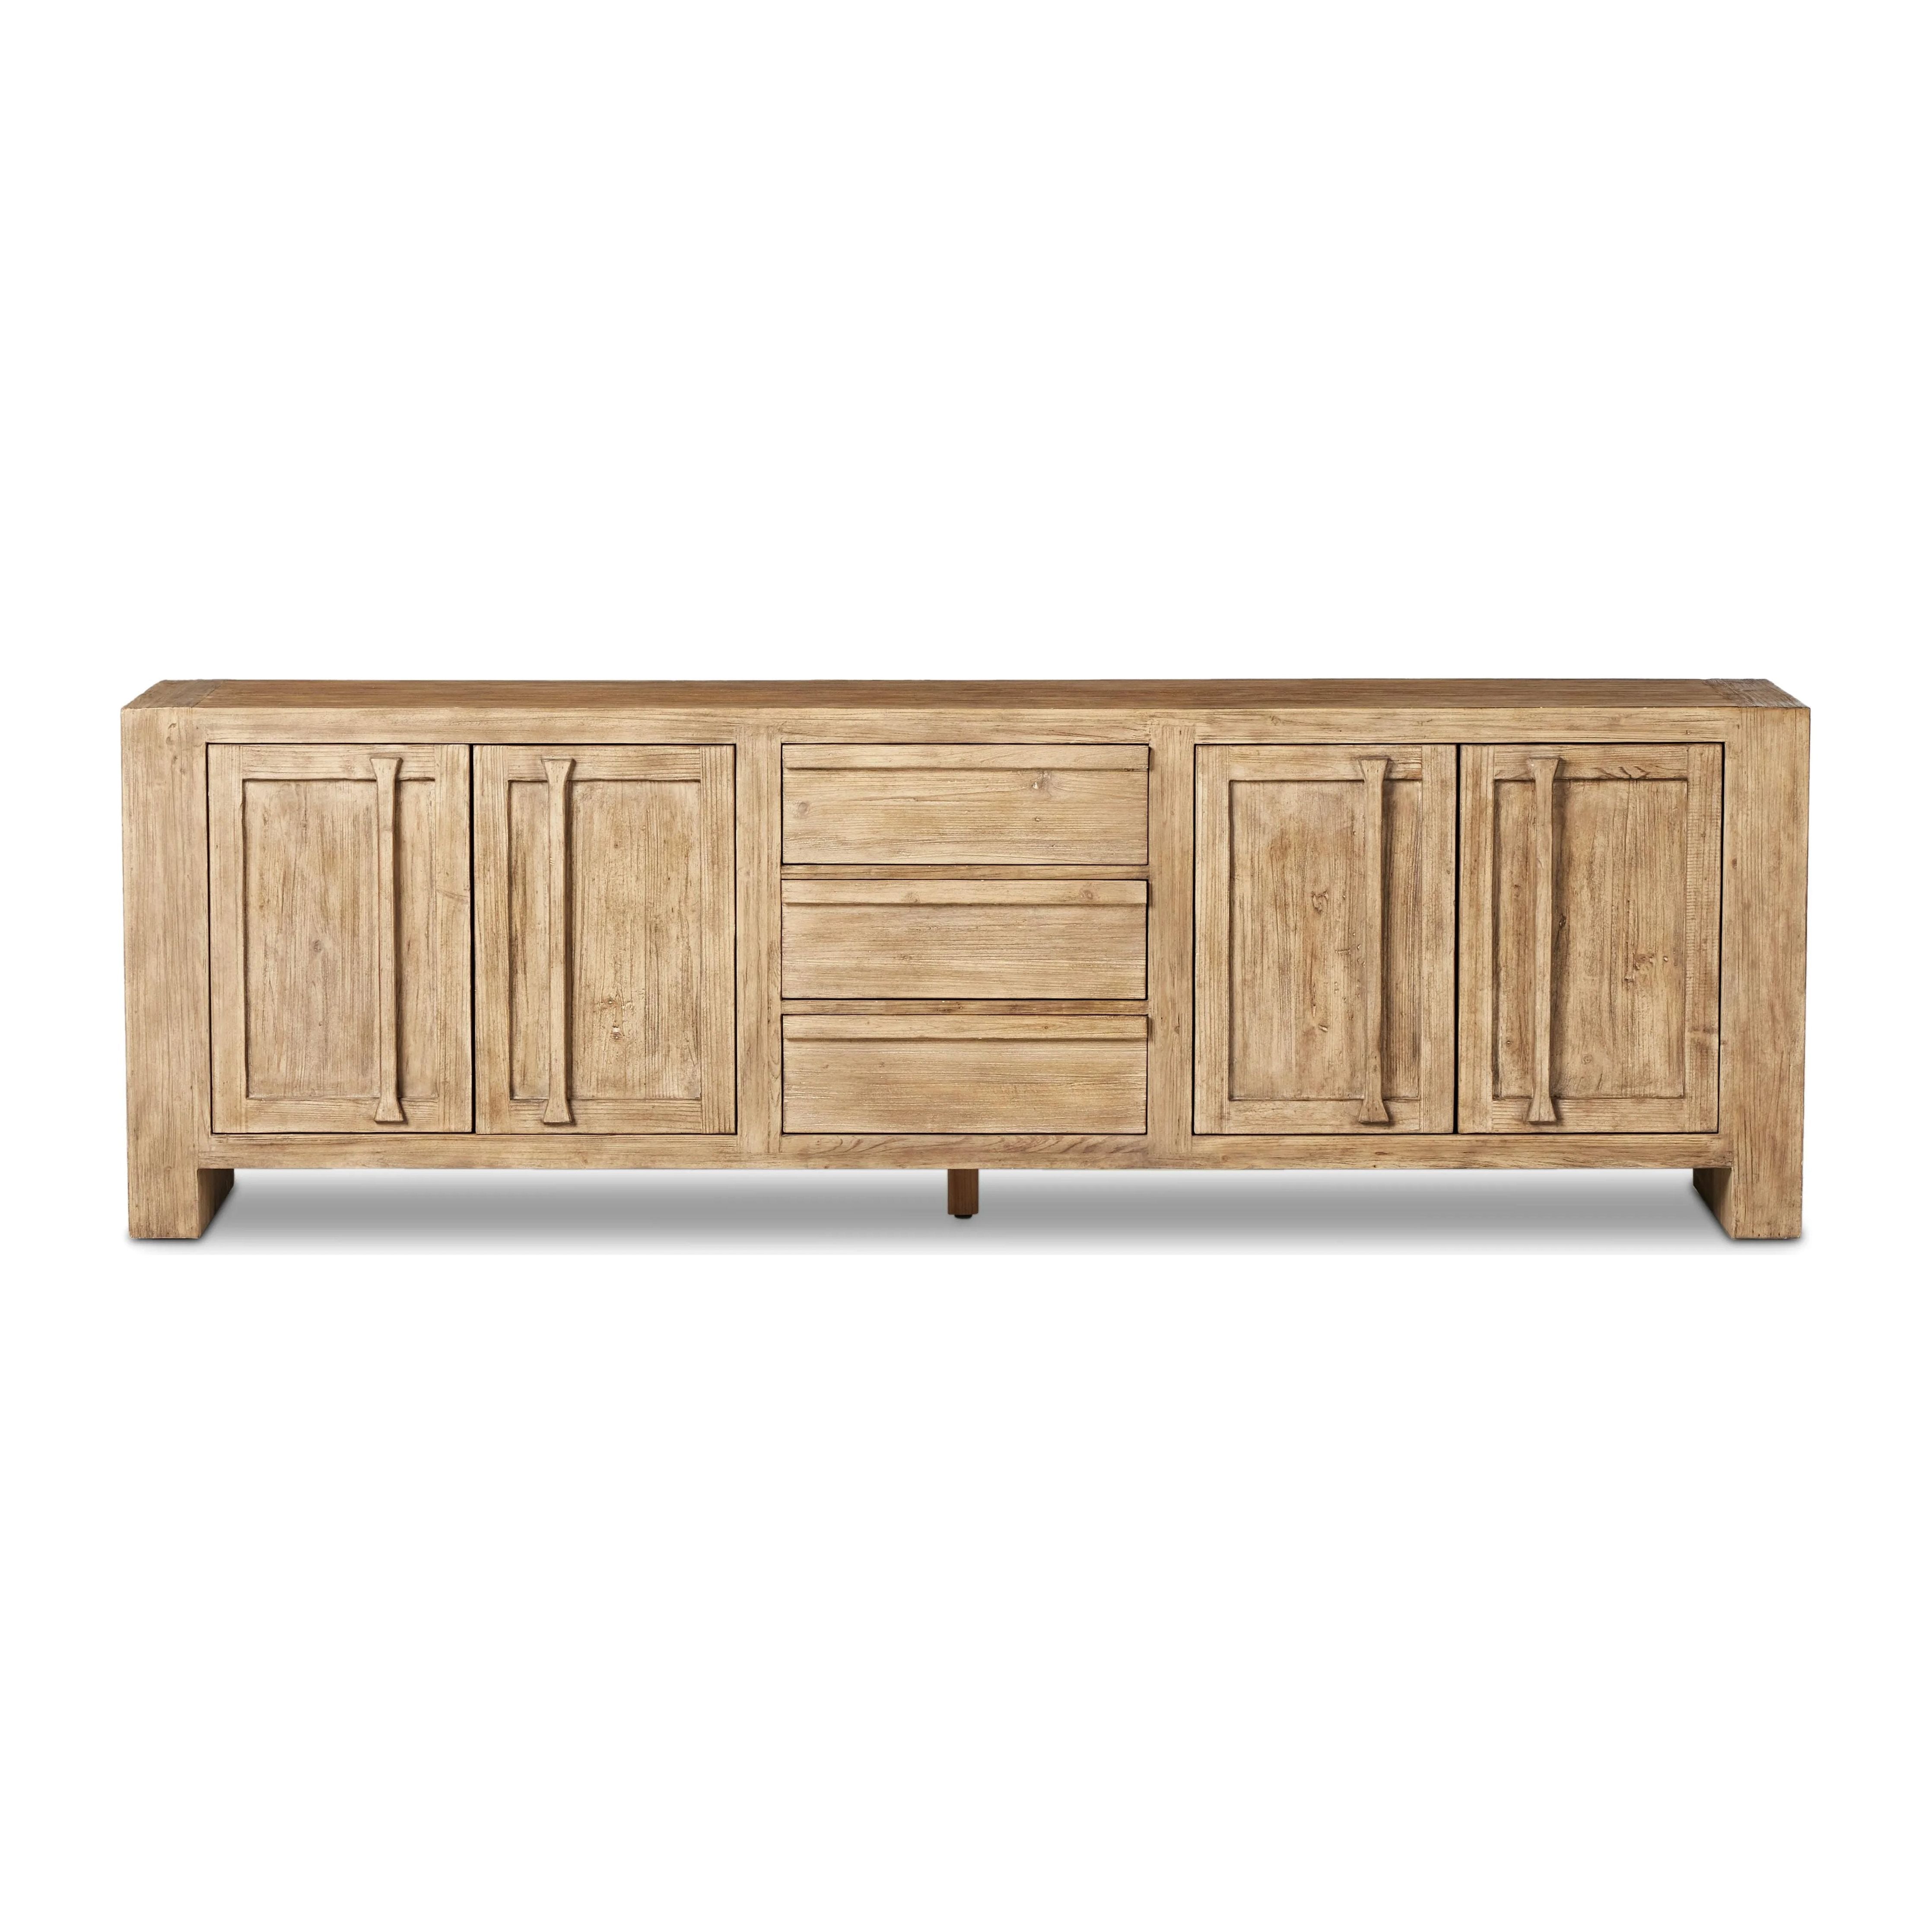 A large, waterfall-style sideboard inspired by Chinese antiques is made from solid pine with a light, distressed finish and butterfly joint connections. Rear cutouts for cord management.Collection: Well Amethyst Home provides interior design, new home construction design consulting, vintage area rugs, and lighting in the Park City metro area.